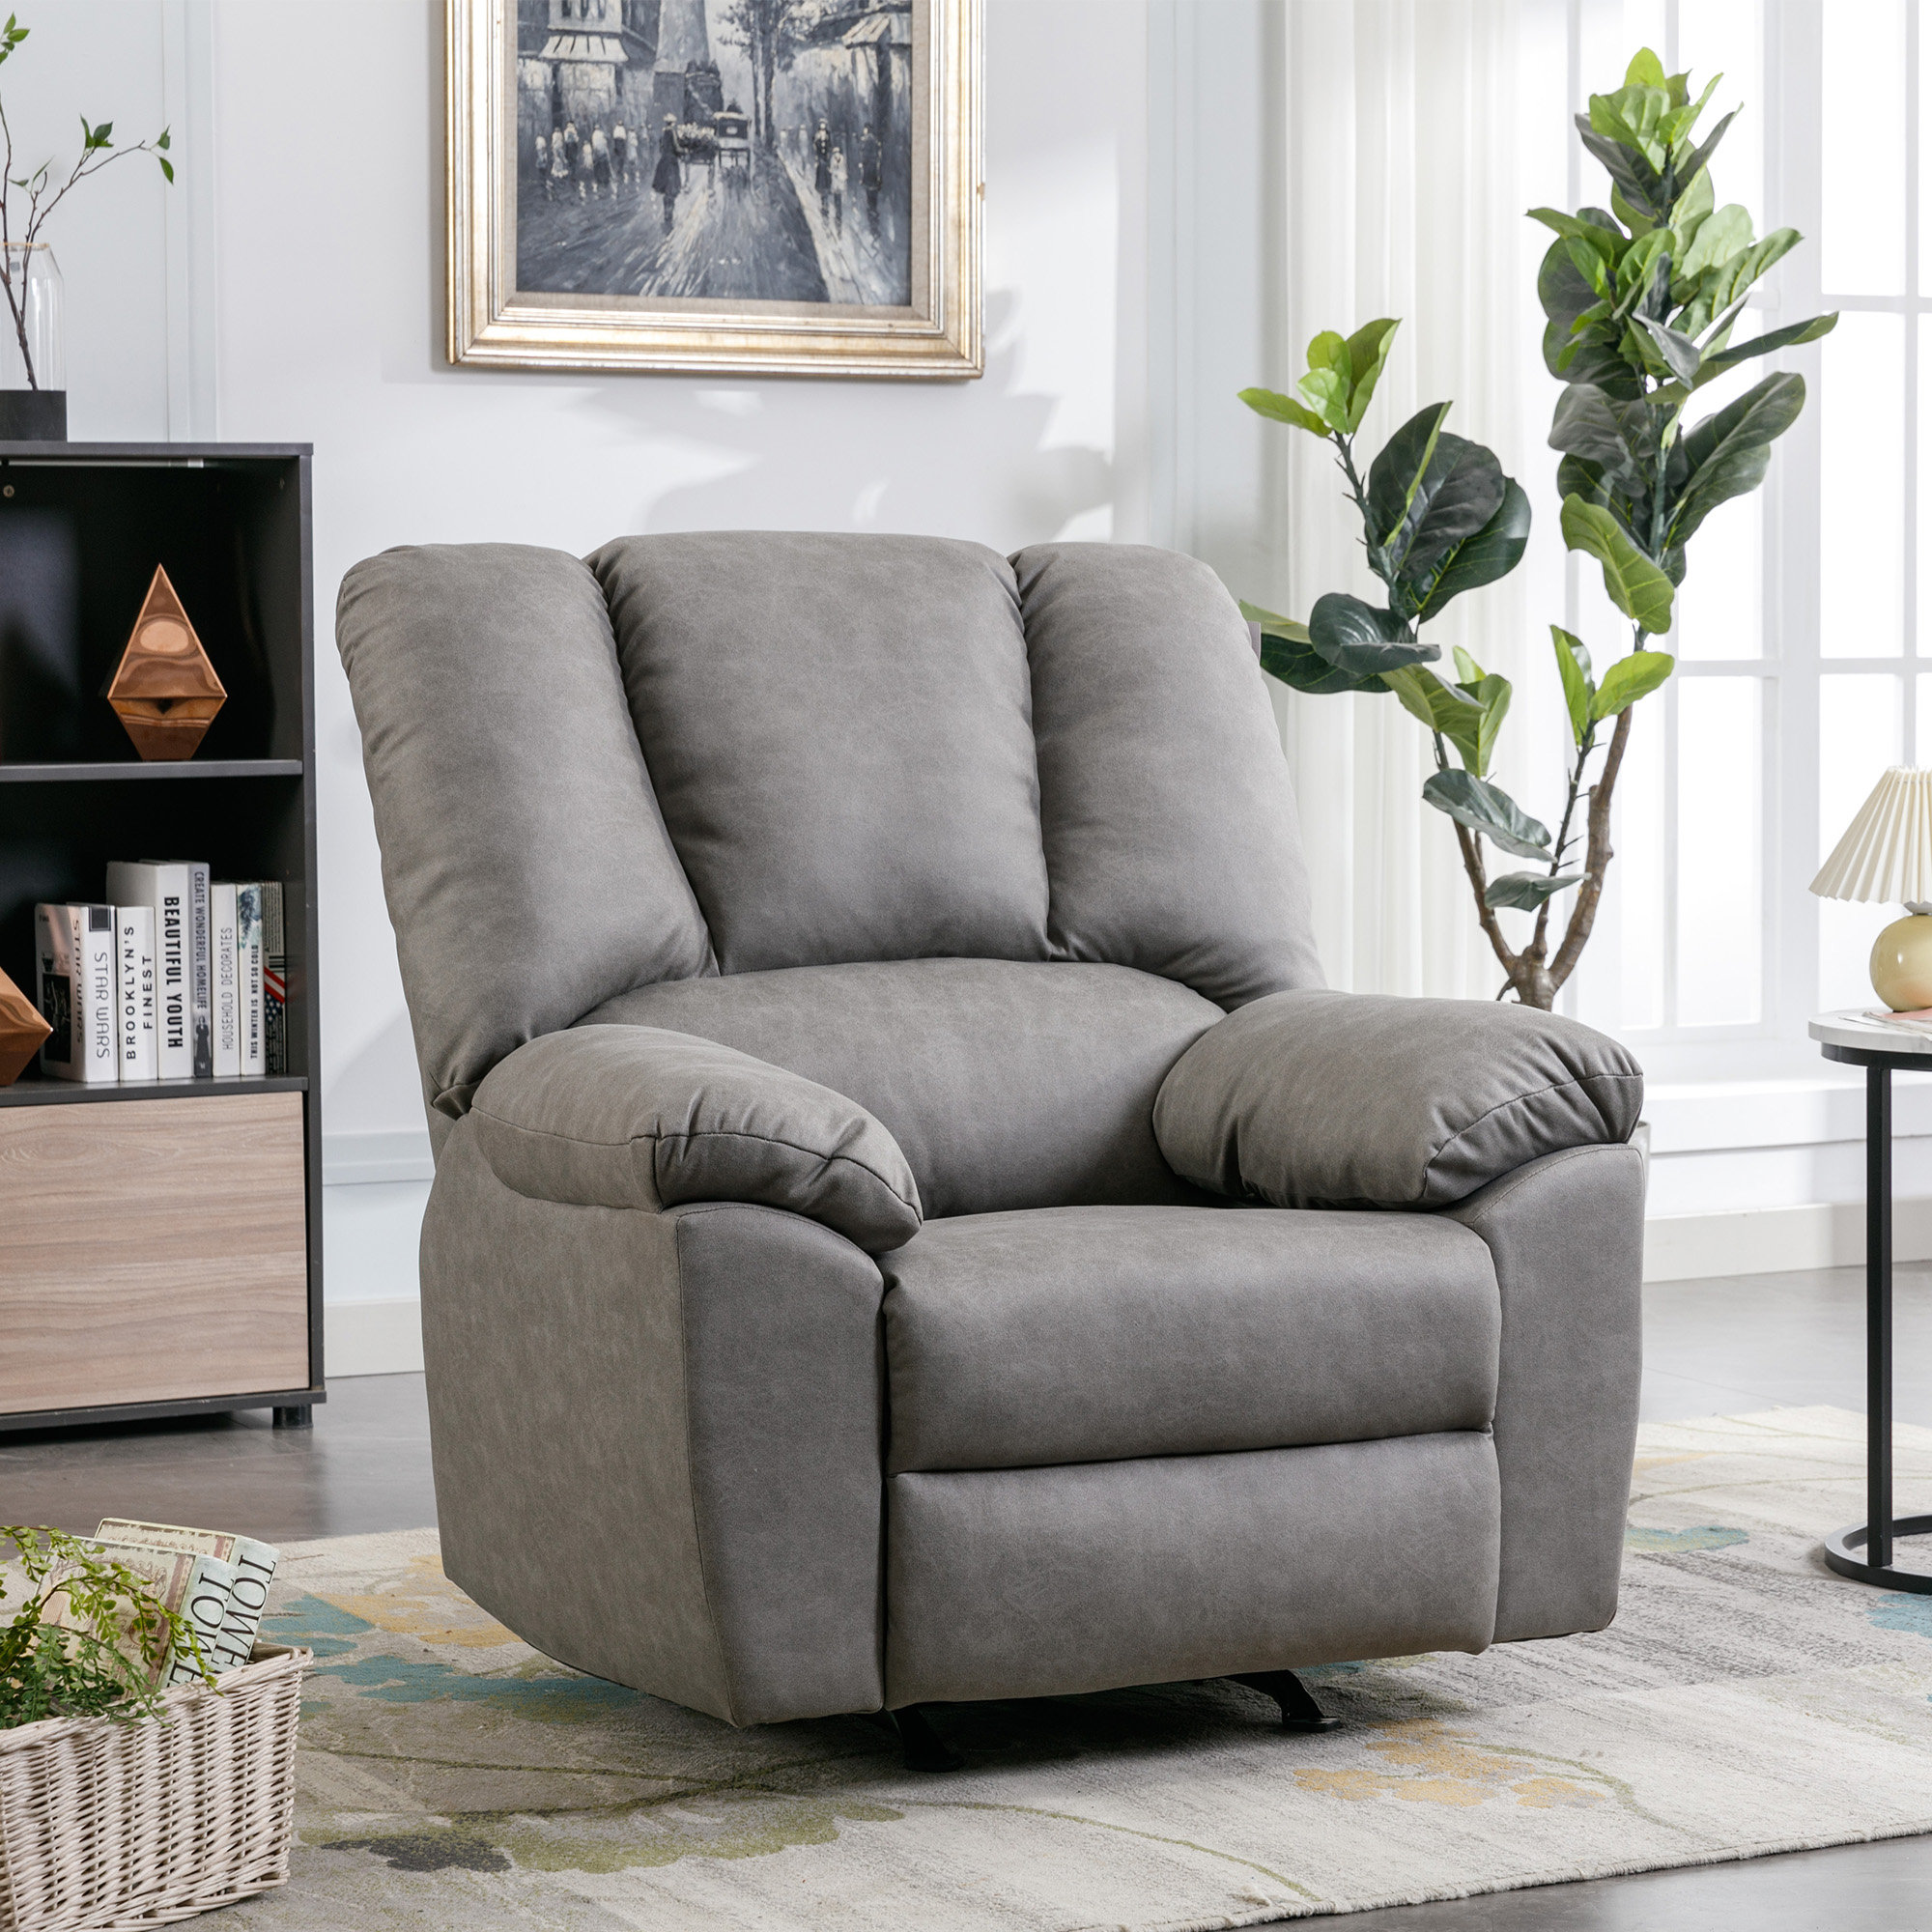 Red Barrel Studio® 39'' Wide Modern and Overstuffed Soft Manual Recliner  with Wide Backrest & Reviews